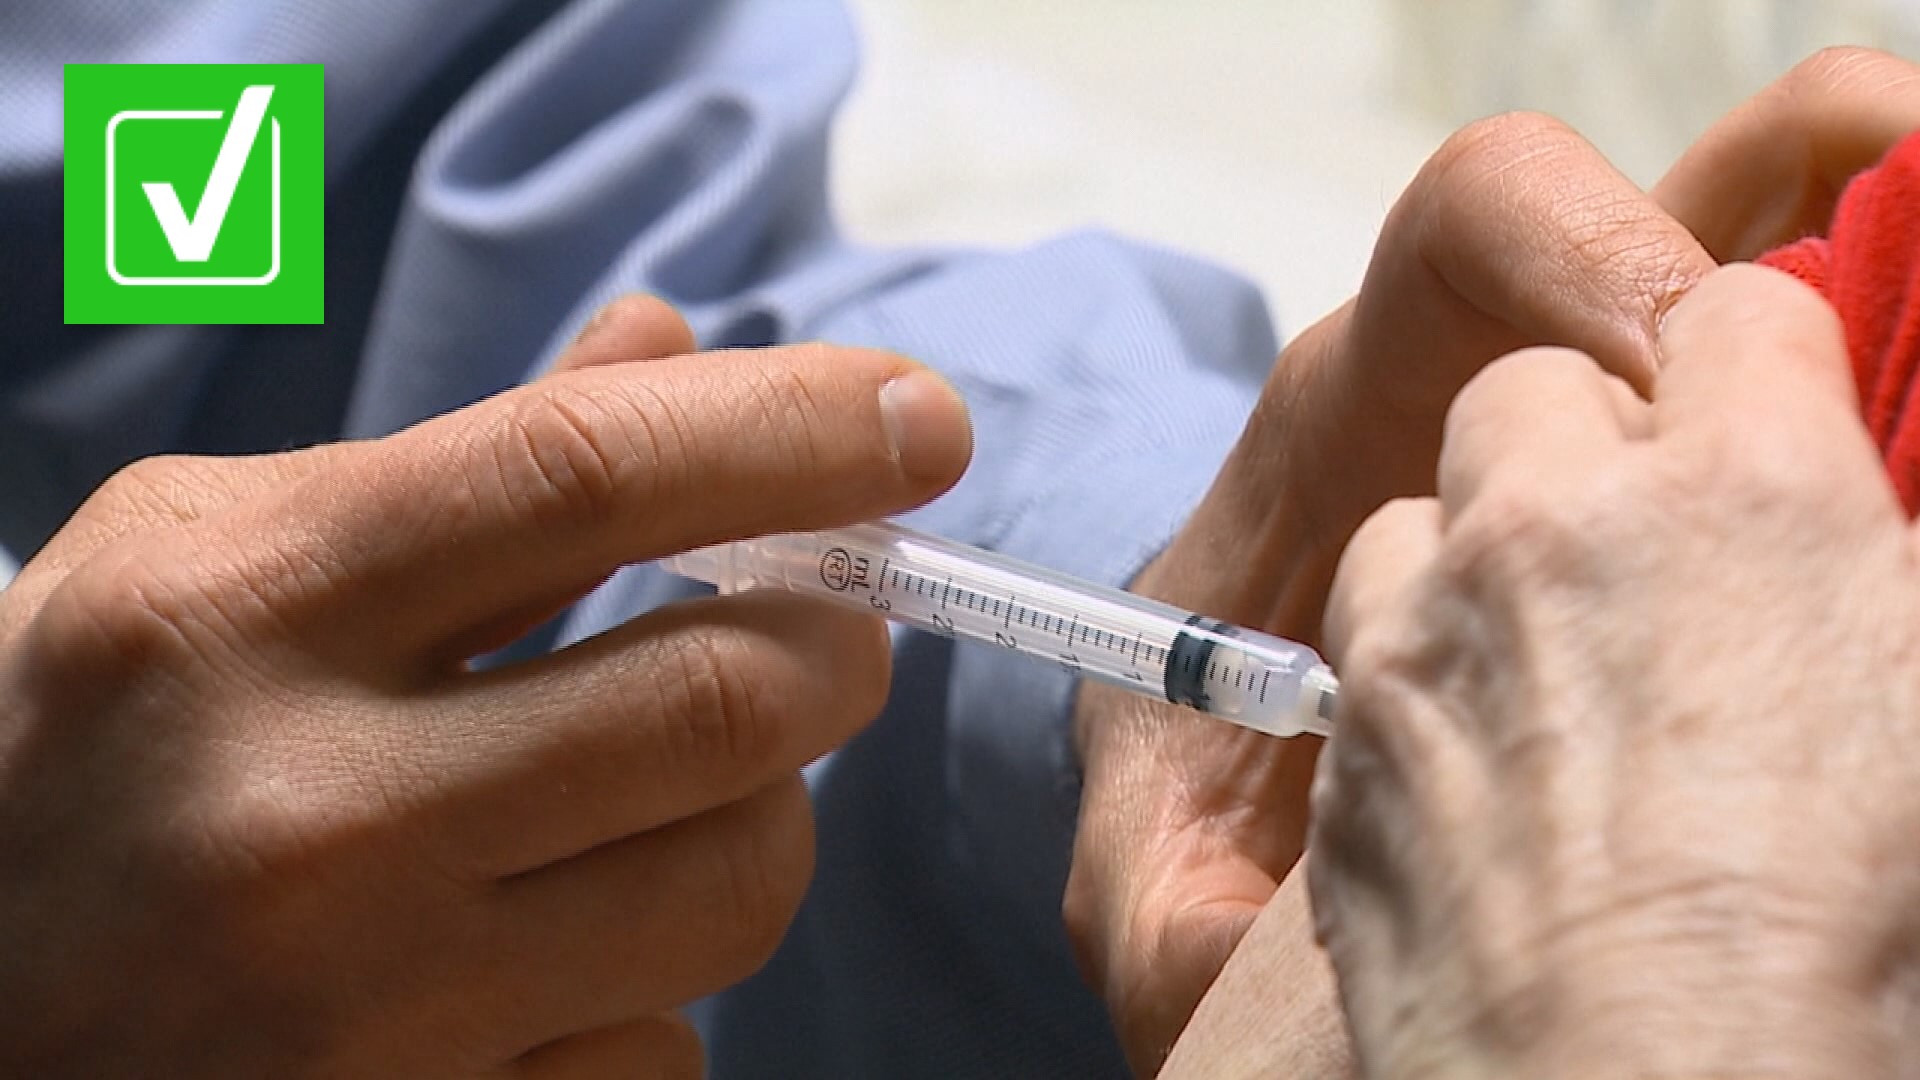 Everyone should get a booster, infectious disease experts say. Doctors are still researching how long the vaccine immunization lasts at full capacity.